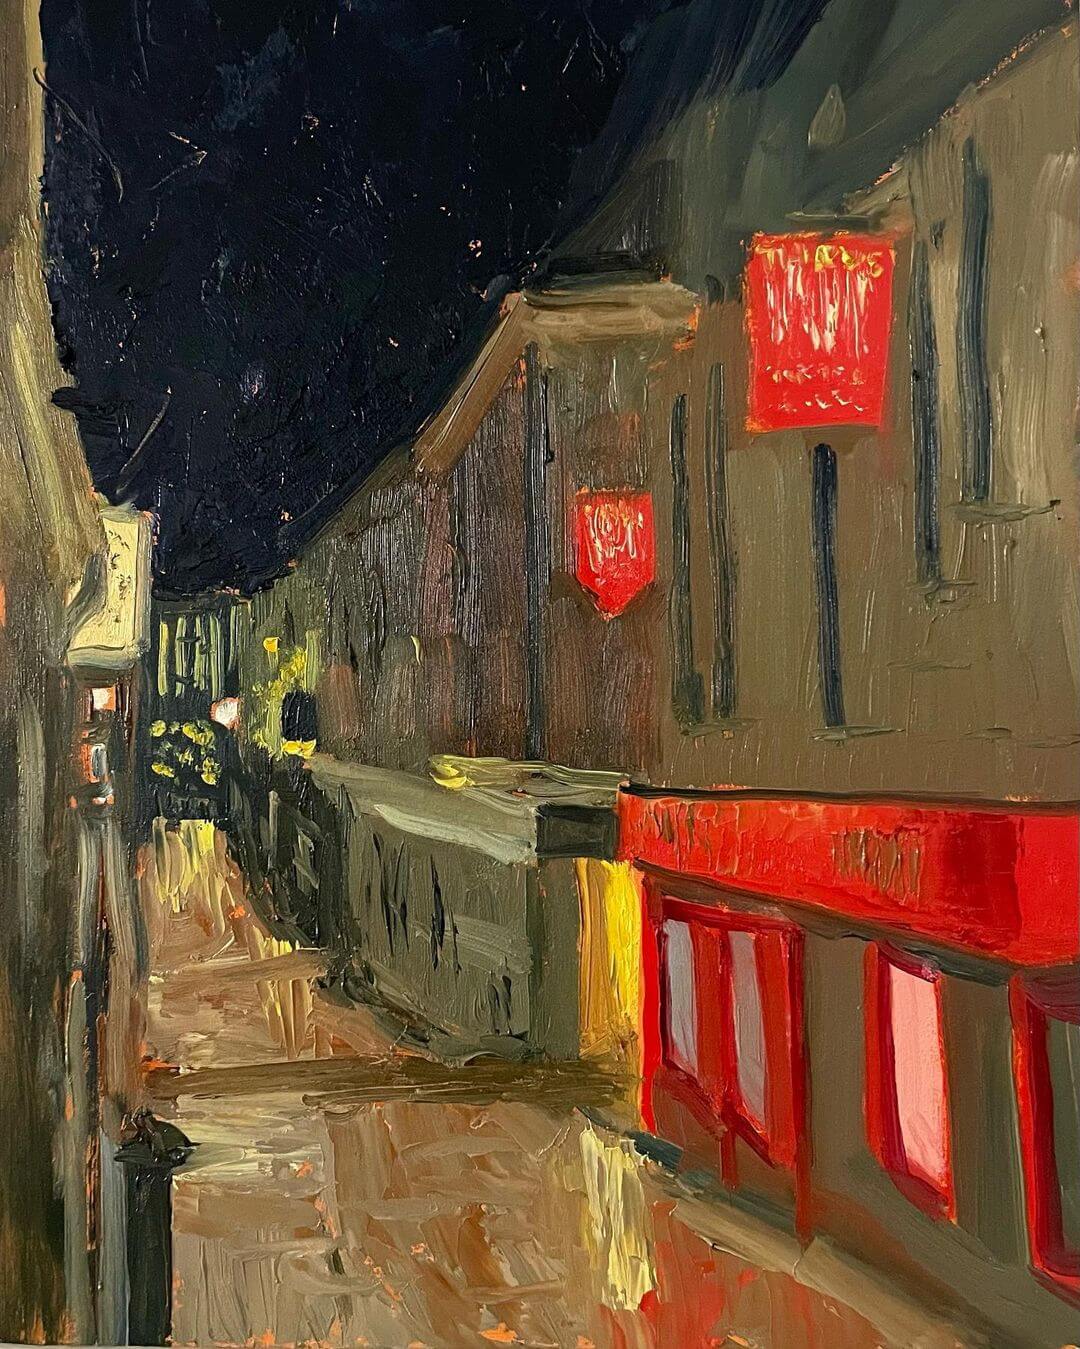 13. A nightscape of a city building painted plein air style.